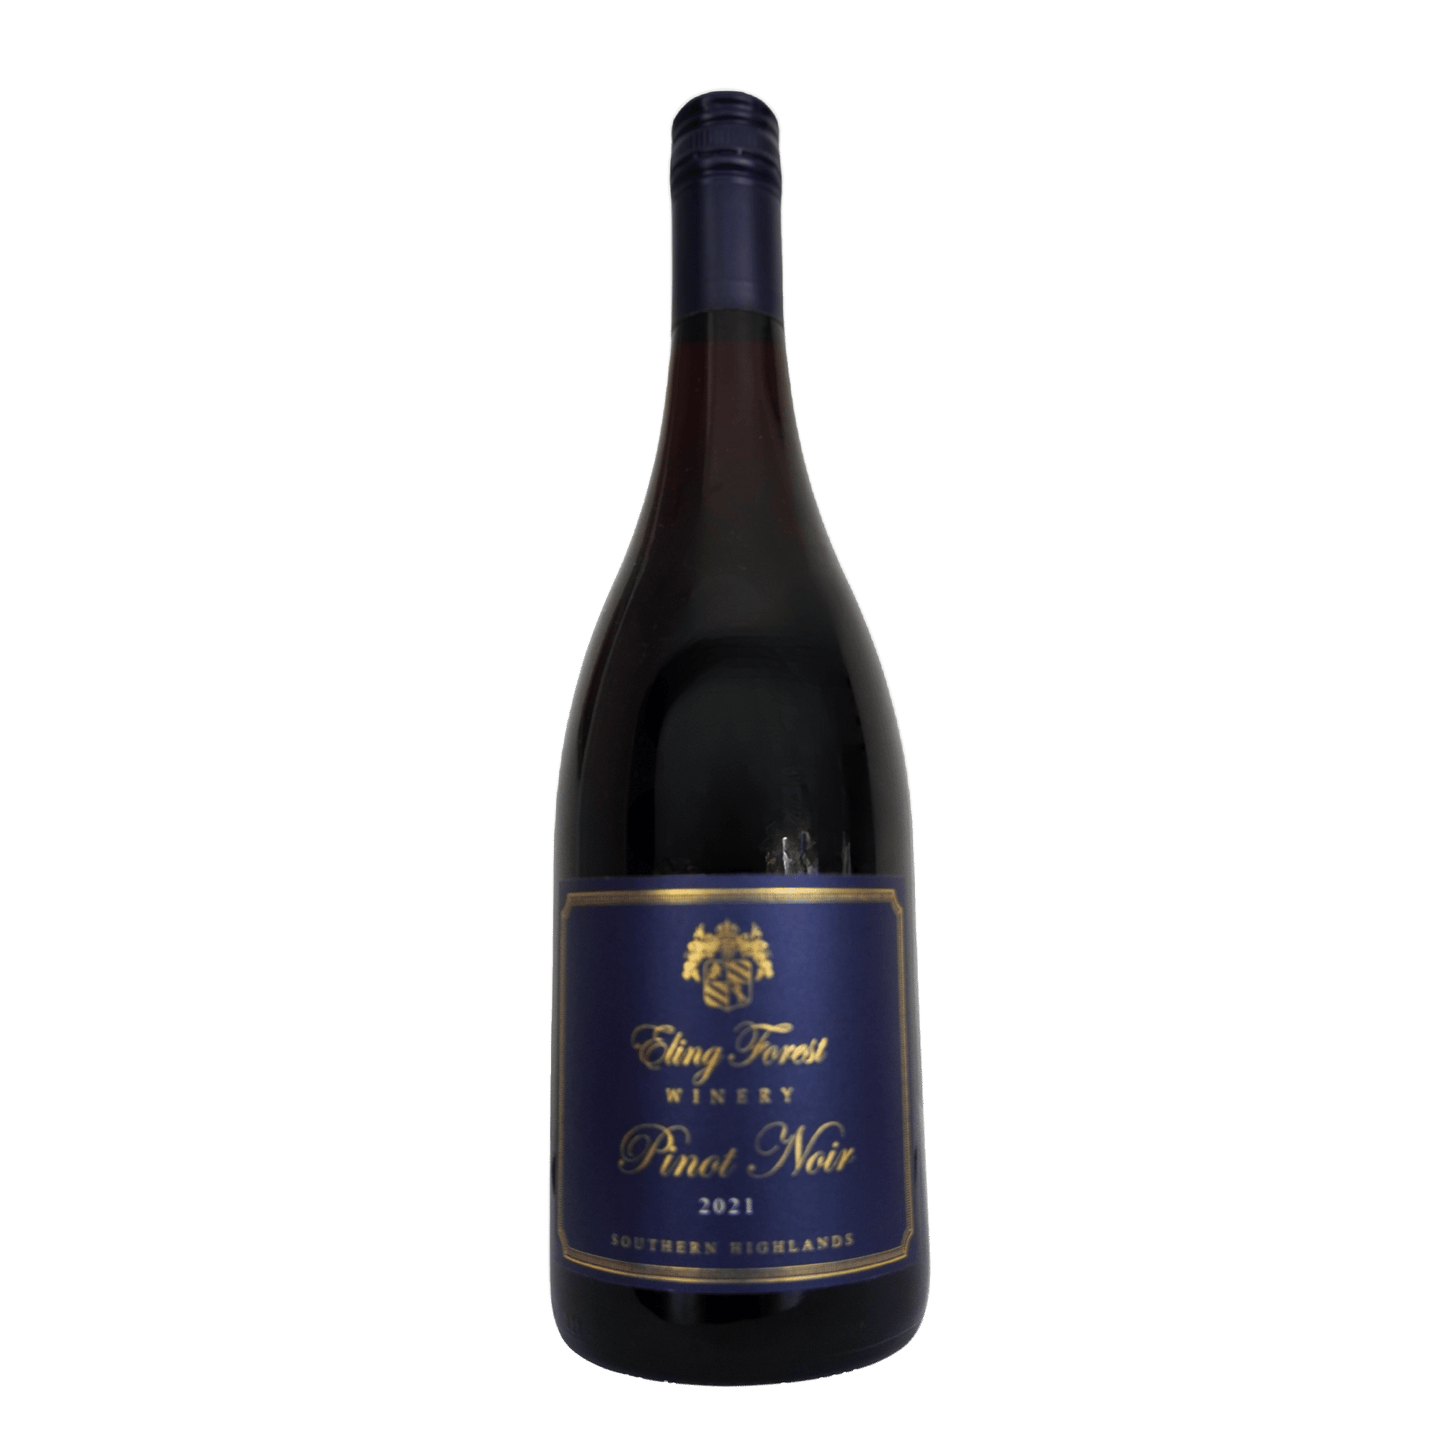 Eling Forest Pinot Noir 2021